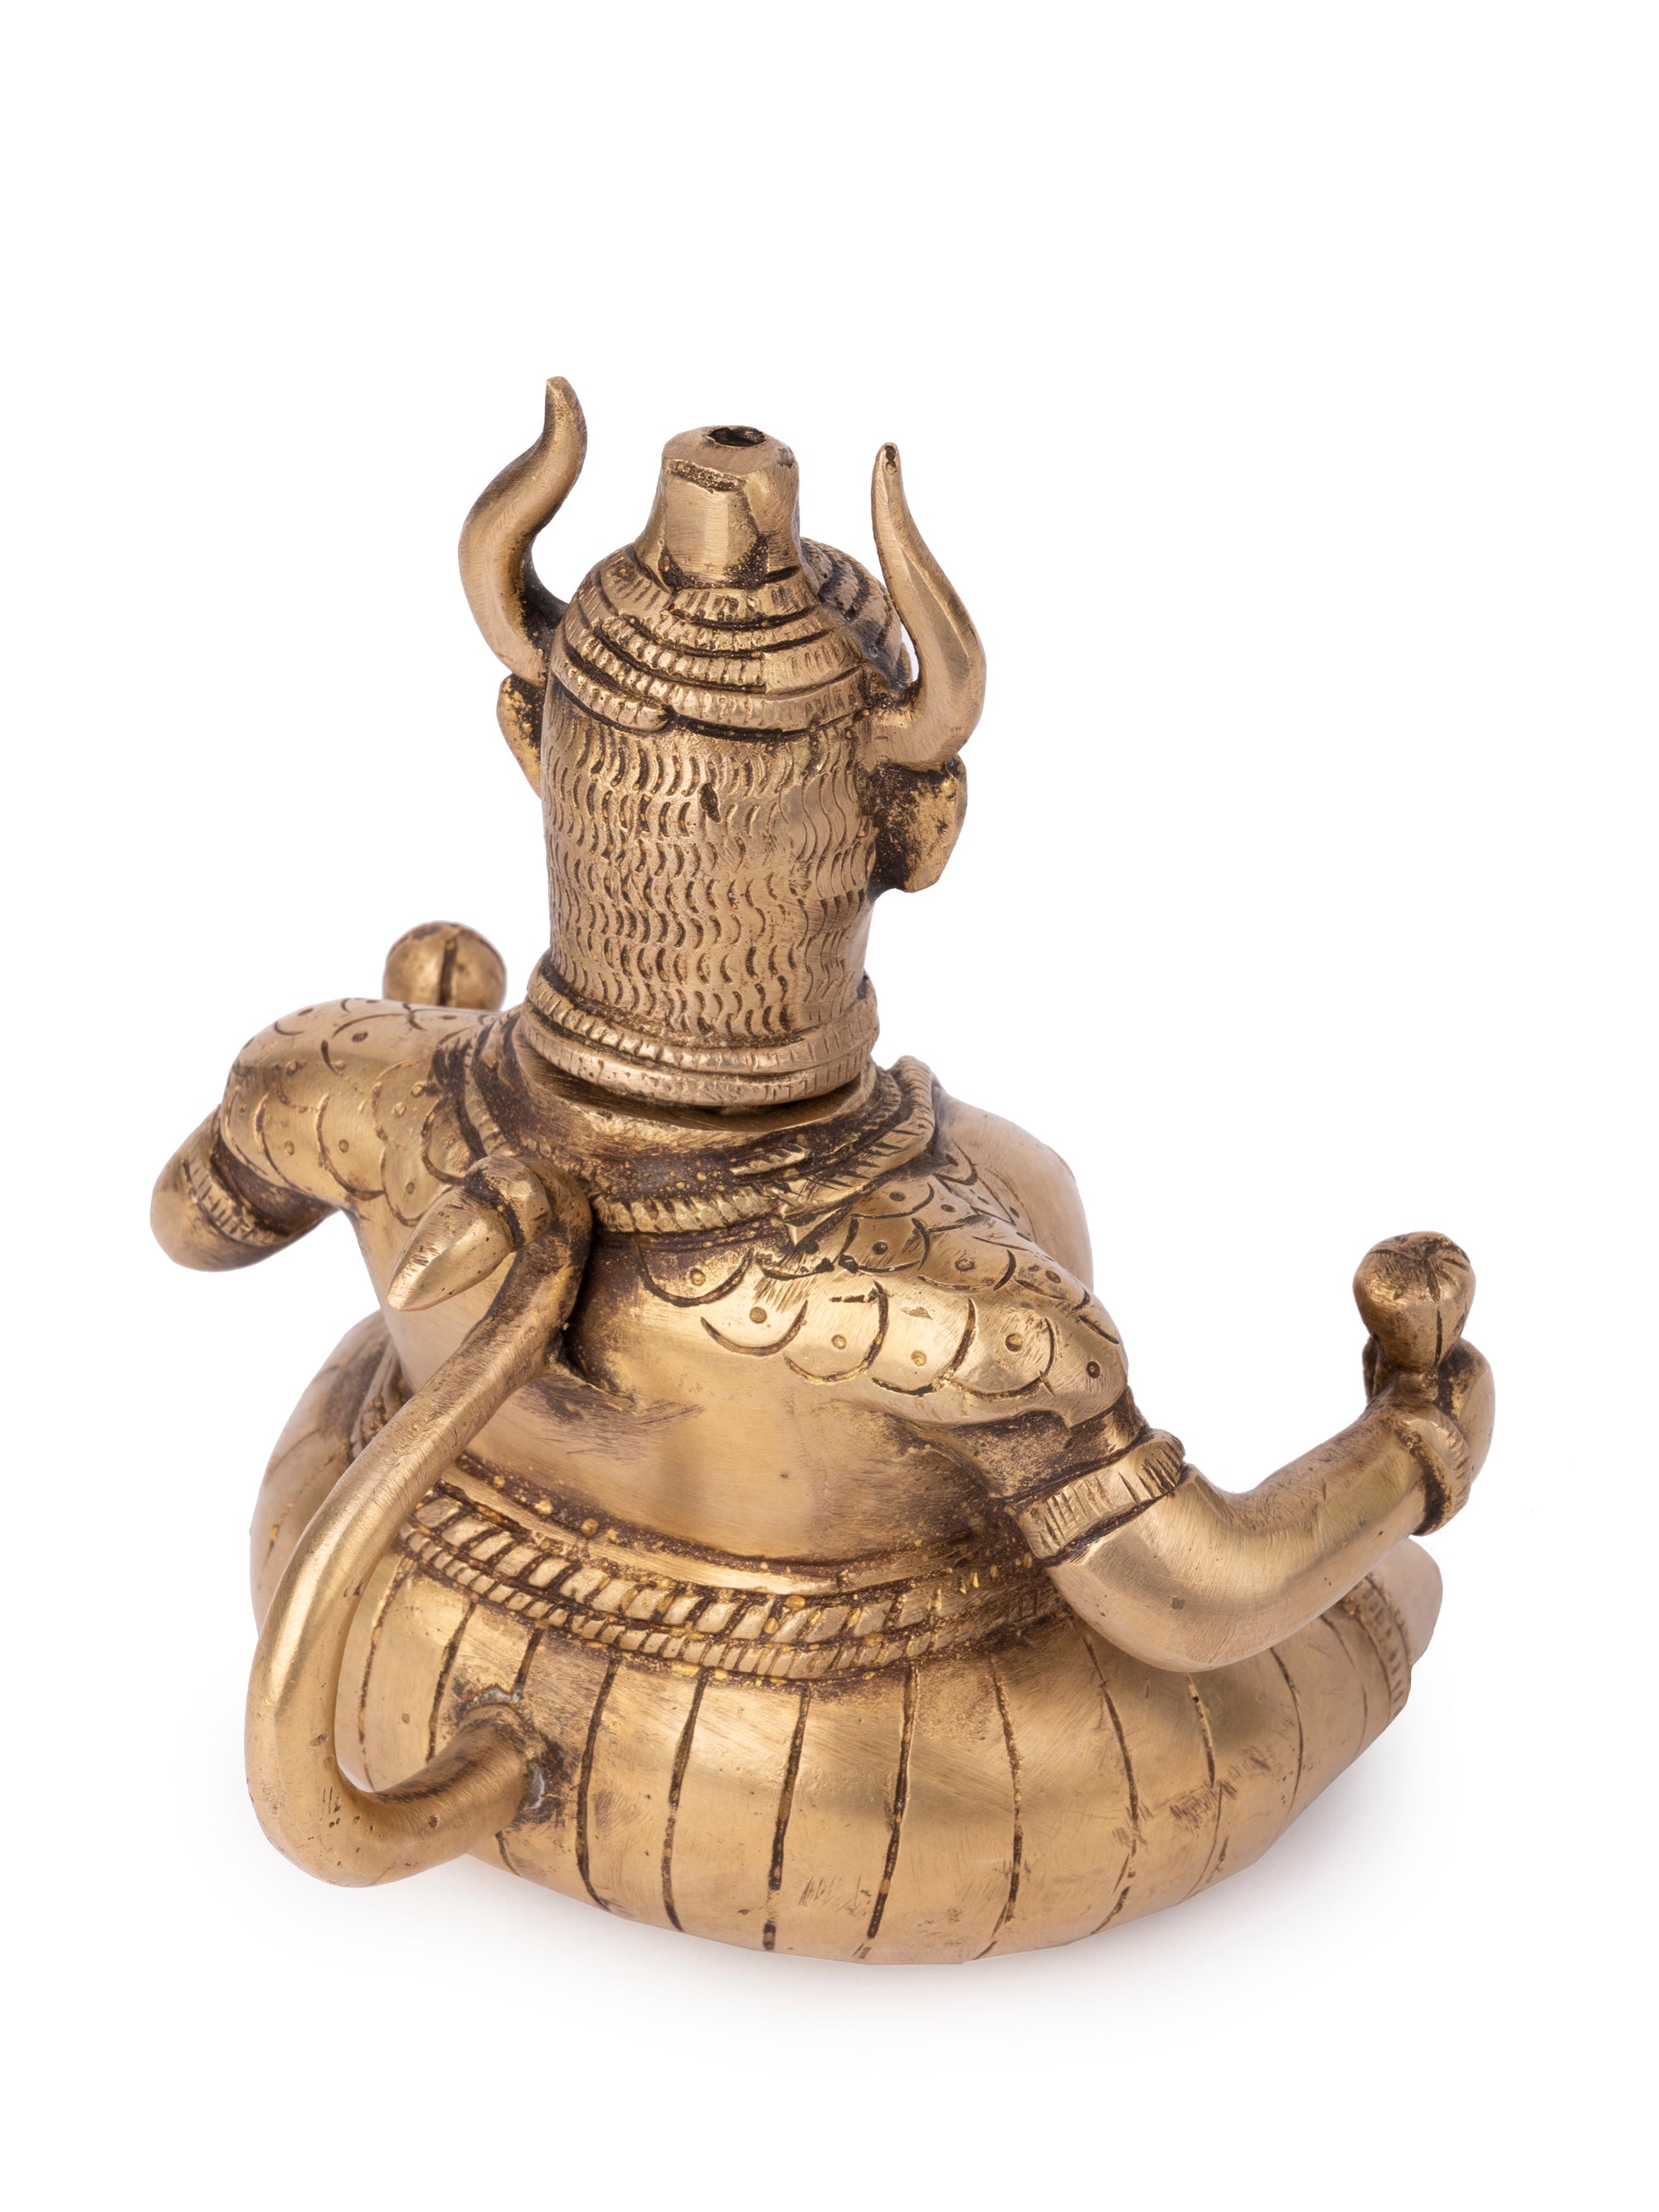 Brass Crafted Lamp Man Figurine with Antique finish - 6 inches height - The Heritage Artifacts